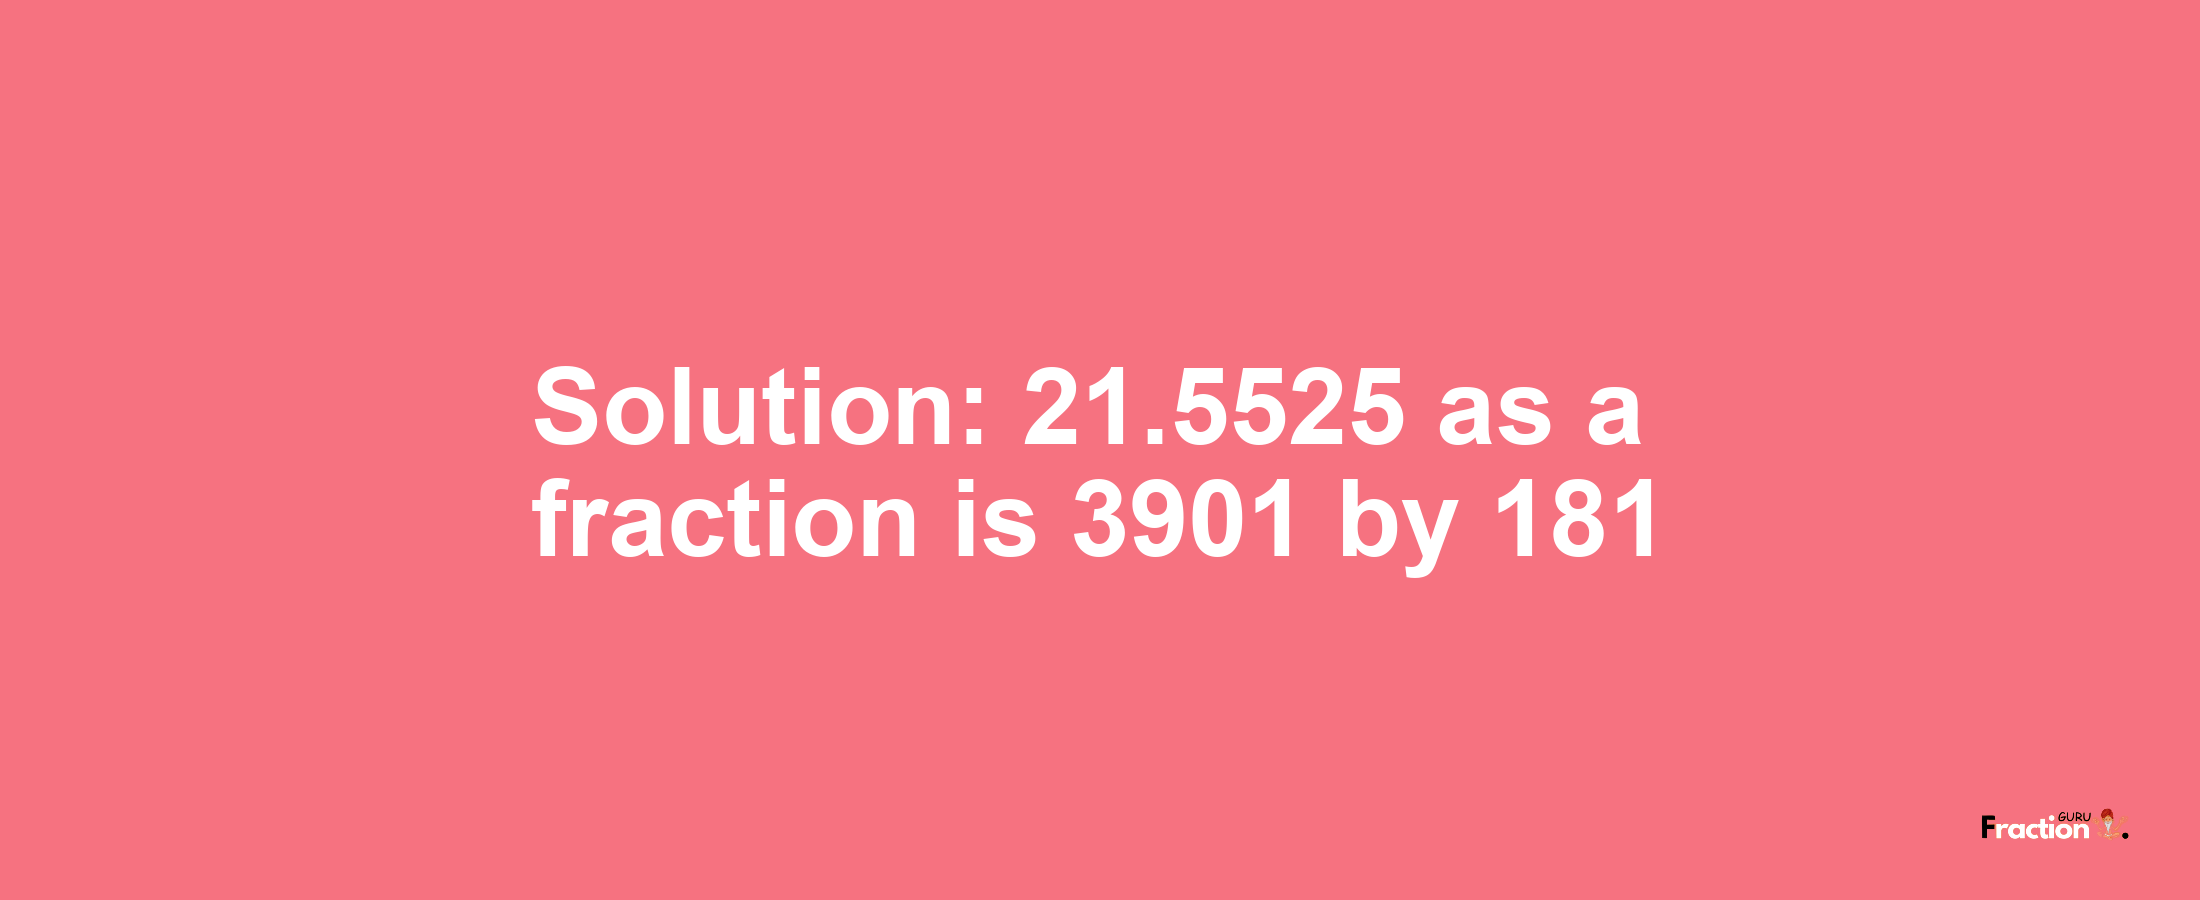 Solution:21.5525 as a fraction is 3901/181